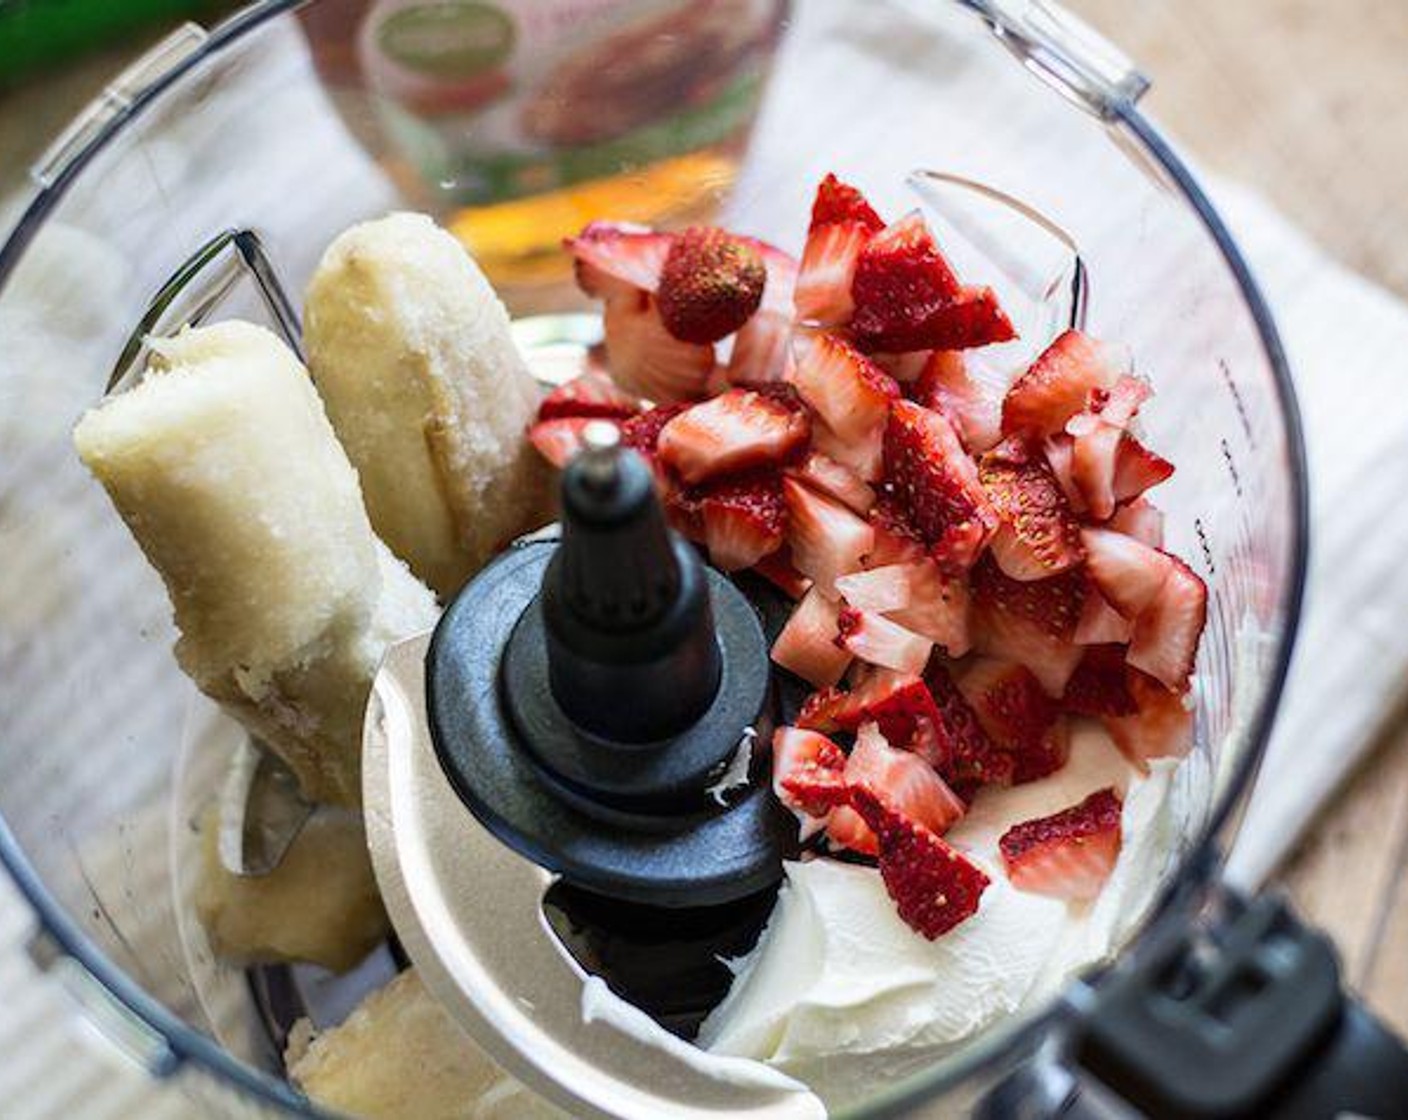 step 1 Add Fresh Strawberry (3/4 cup) to a bowl of a food processor, followed by Banana (1), Cream Cheese (1/2 cup), Maple Syrup (2 Tbsp), Whole Milk (1/4 cup), Organic Sweet Cream Coffee Creamer (1/4 cup) and the juice from Lemon (1).